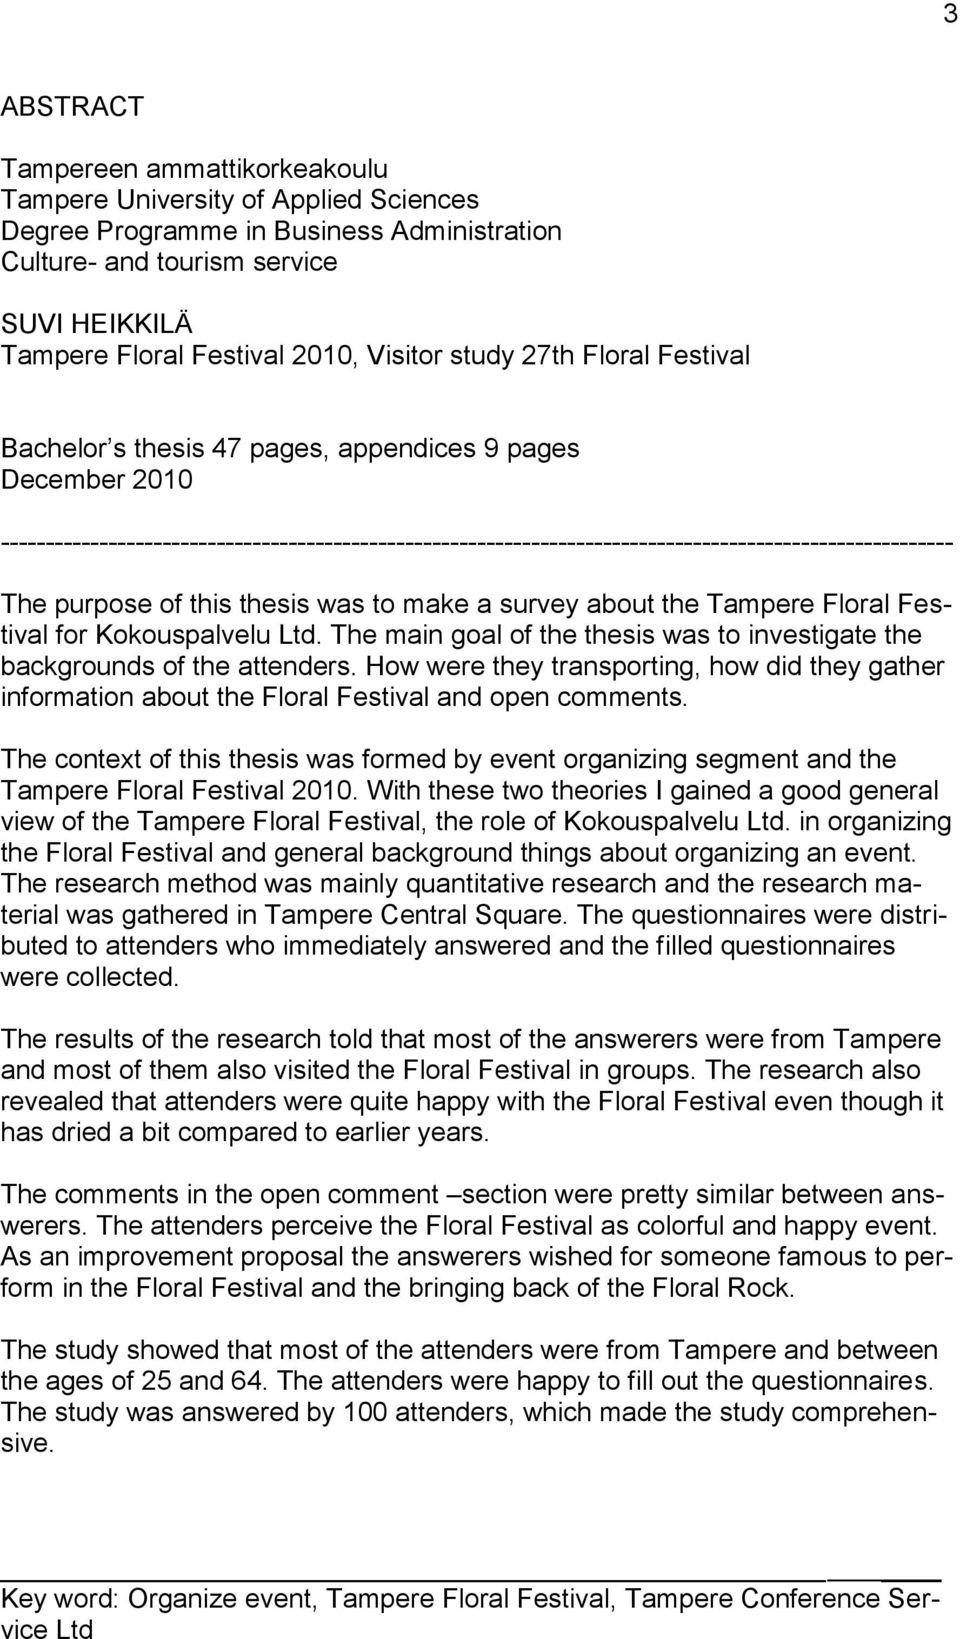 ---------------------------------------------------------------------------------------------------------- The purpose of this thesis was to make a survey about the Tampere Floral Festival for